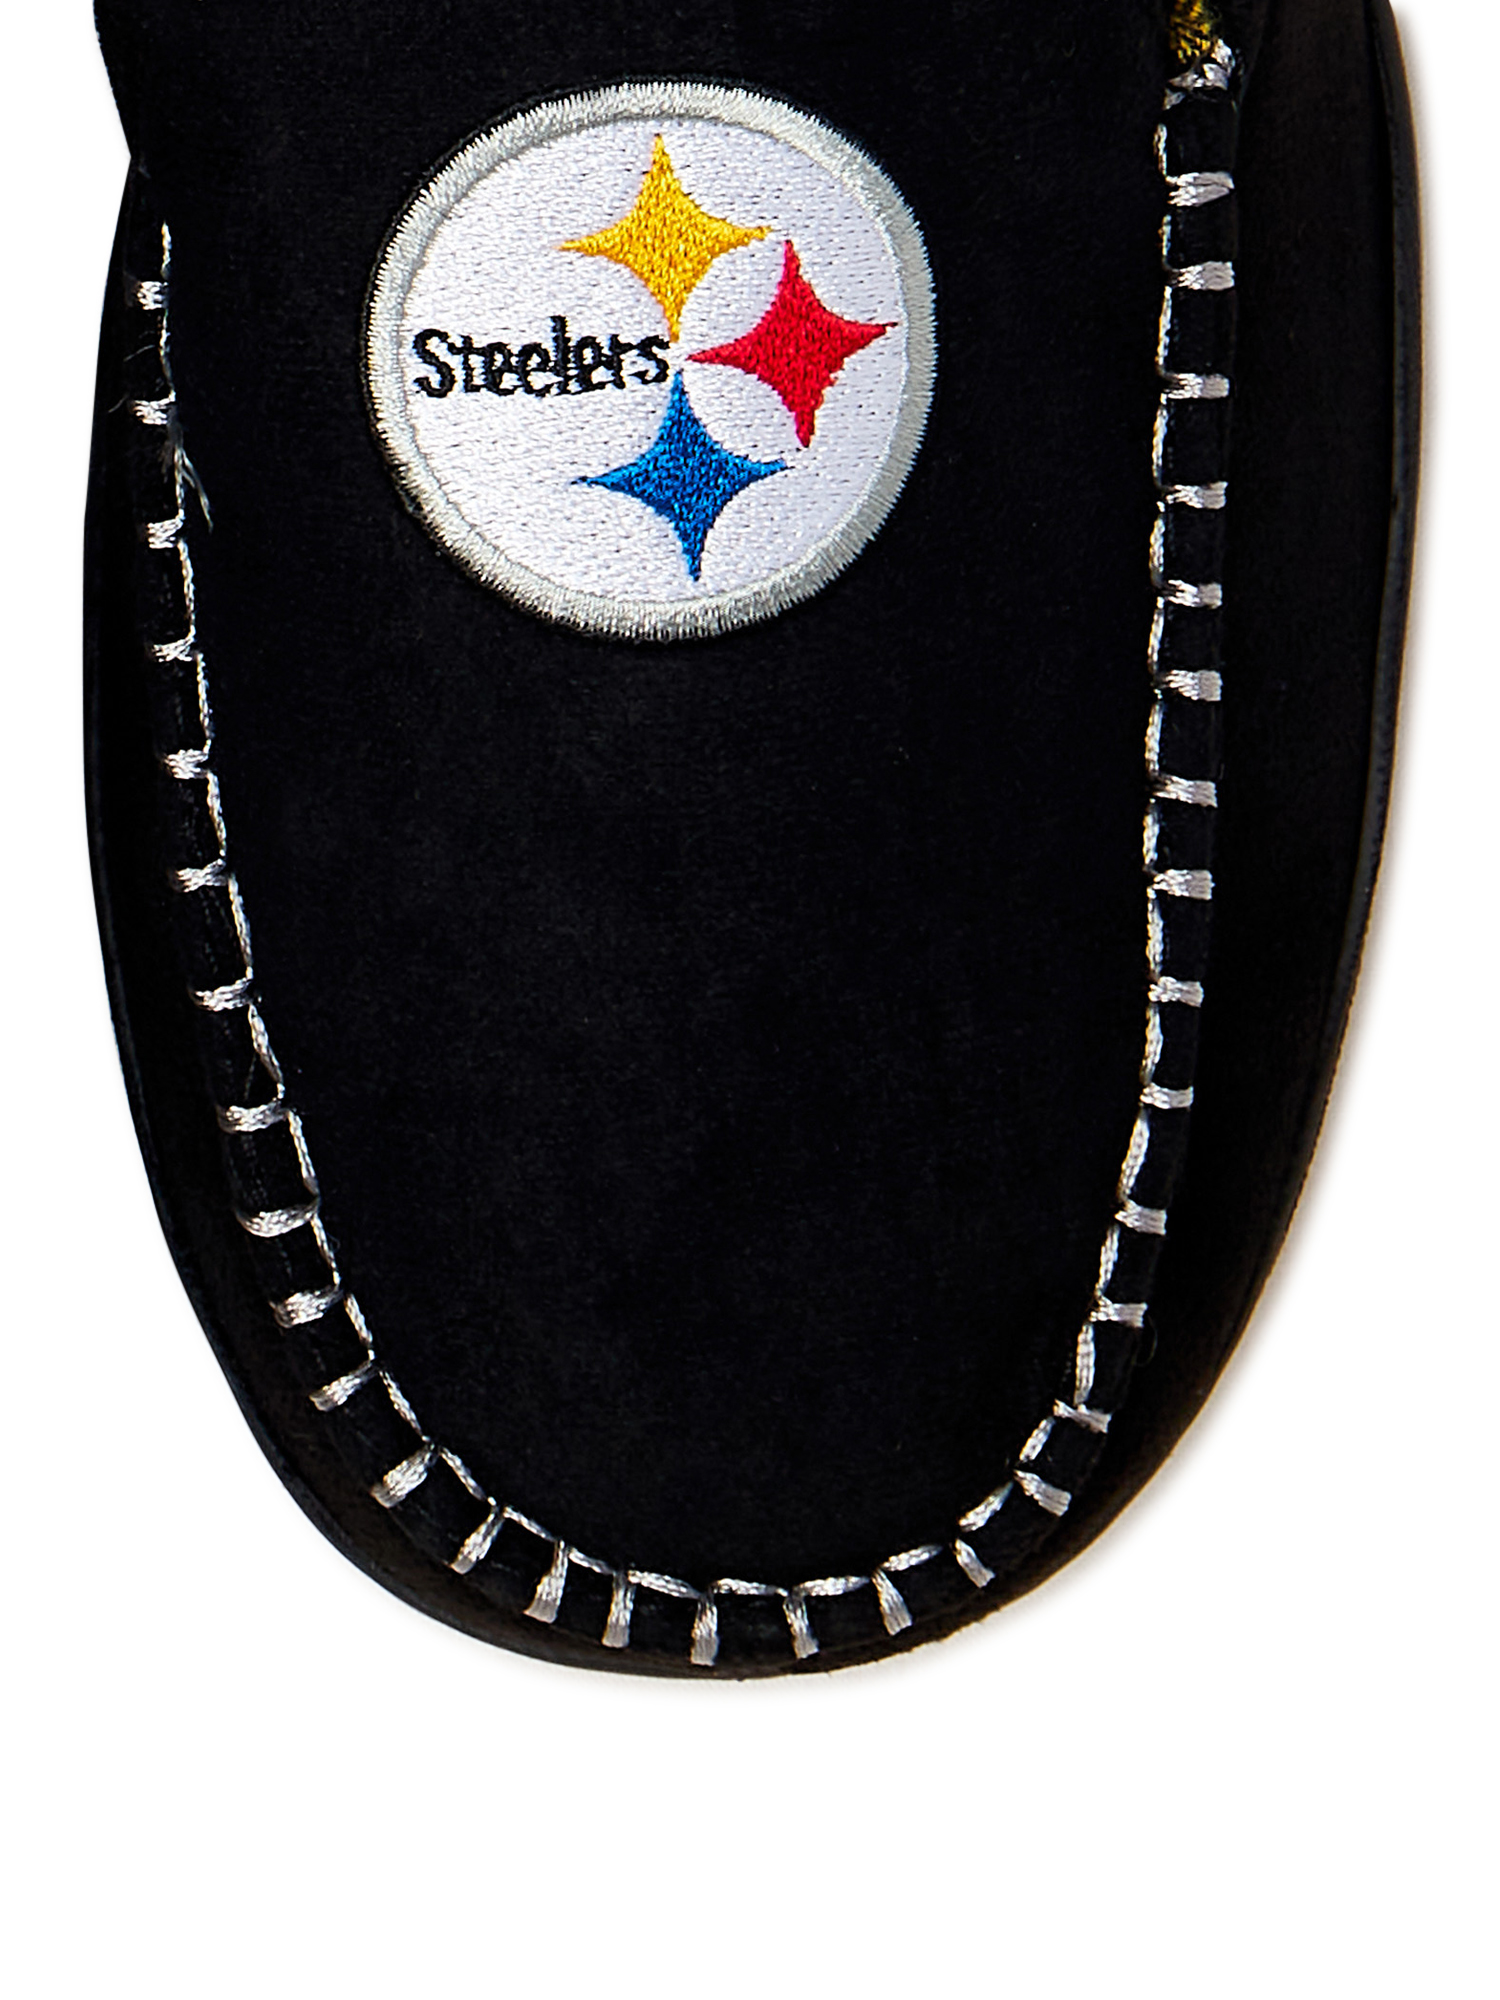 FOCO Pittsburgh Steelers Men's Moccasins with Flannel Liner - Walmart.com